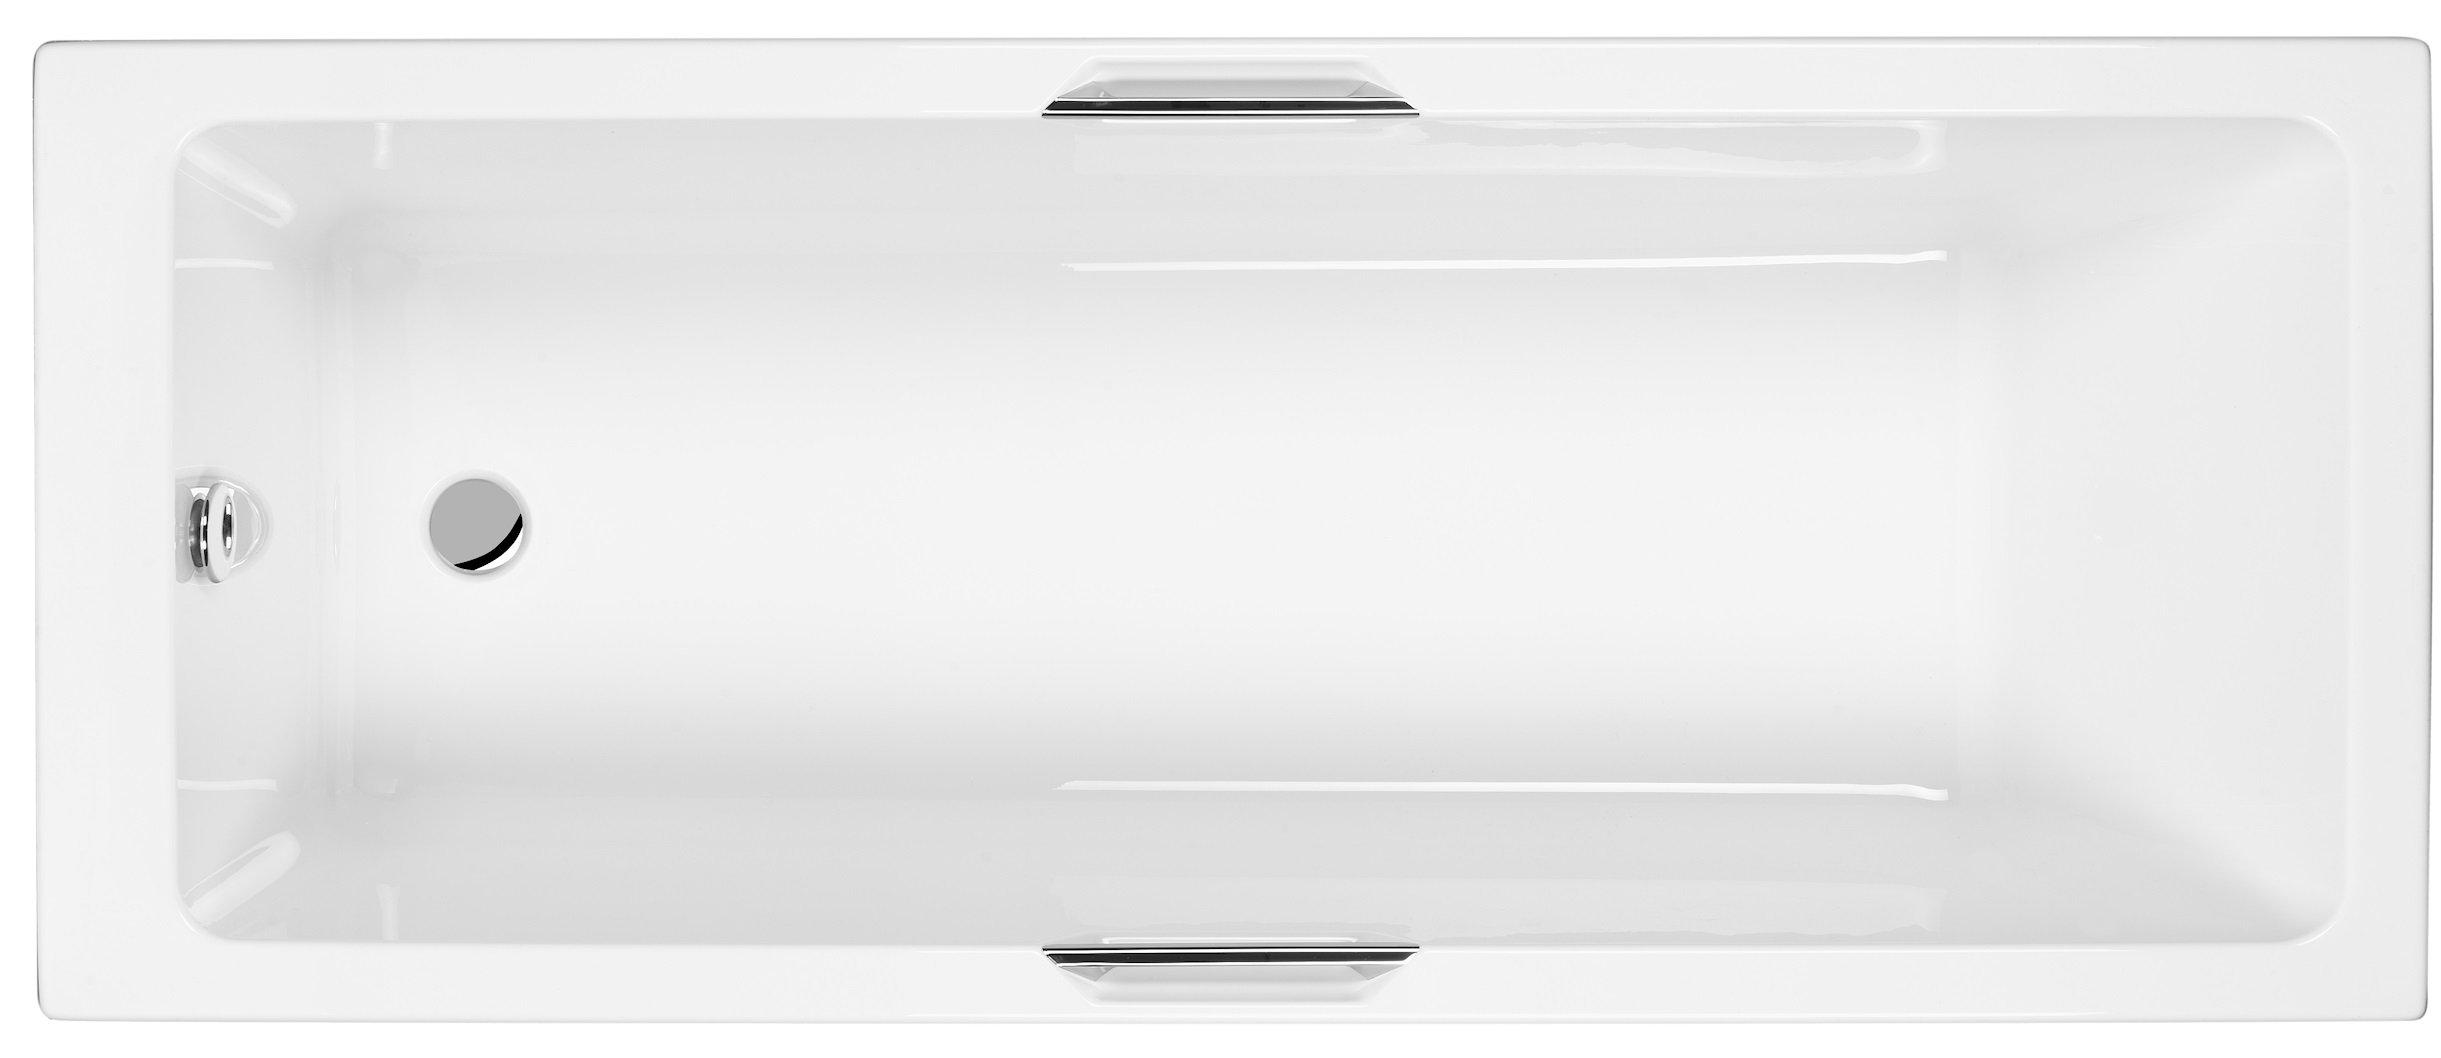 Carron Quantum Integra Eco Single Ended No Tap Hole Twin Grip Carronite Bath with Front Bath Panel - 1600 x 700mm